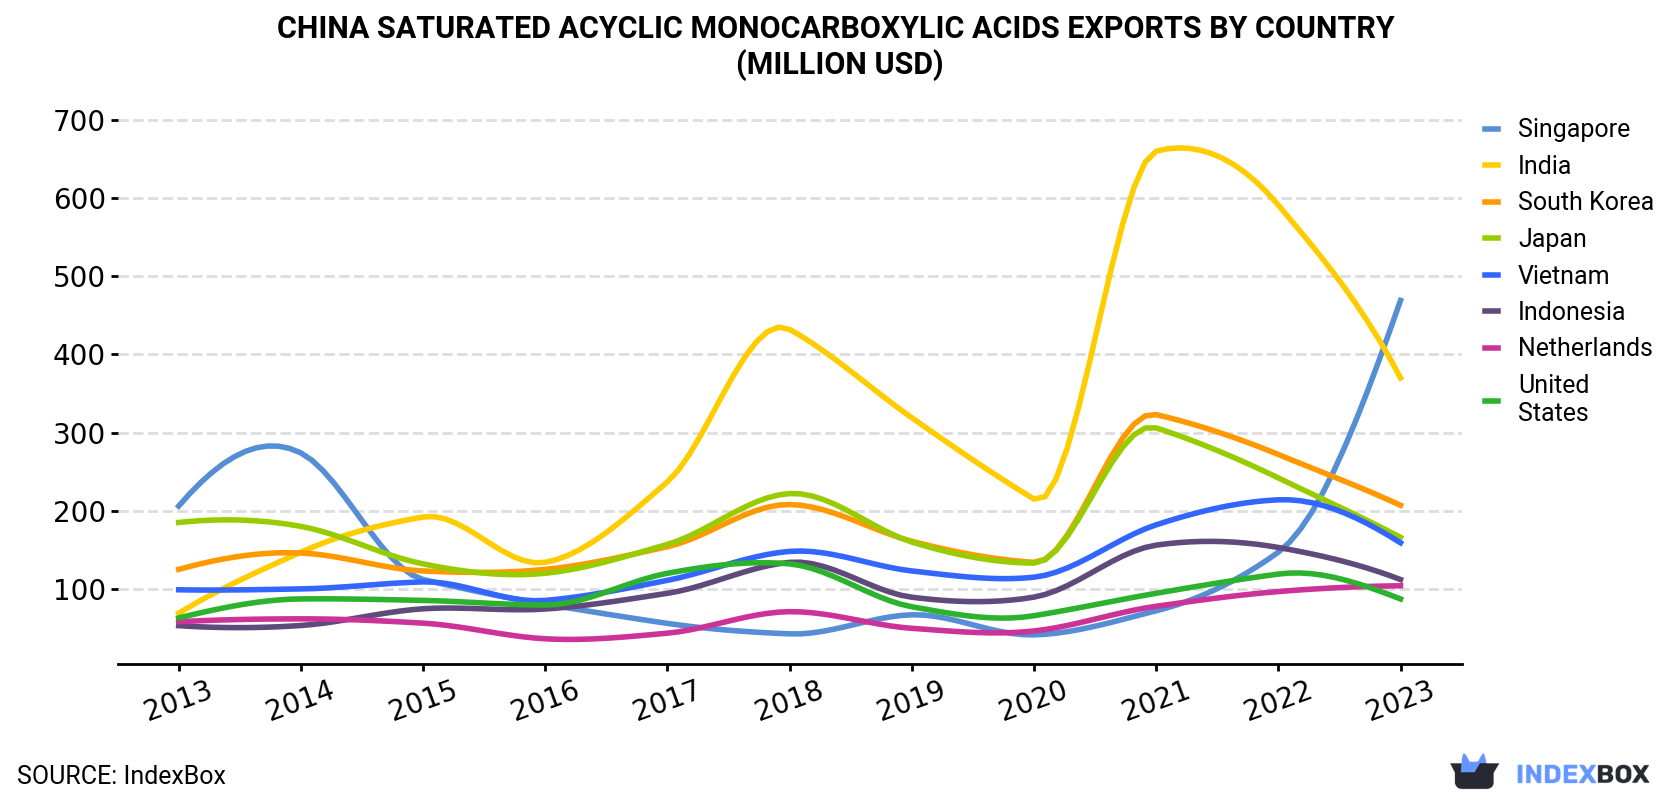 China Saturated Acyclic Monocarboxylic Acids Exports By Country (Million USD)